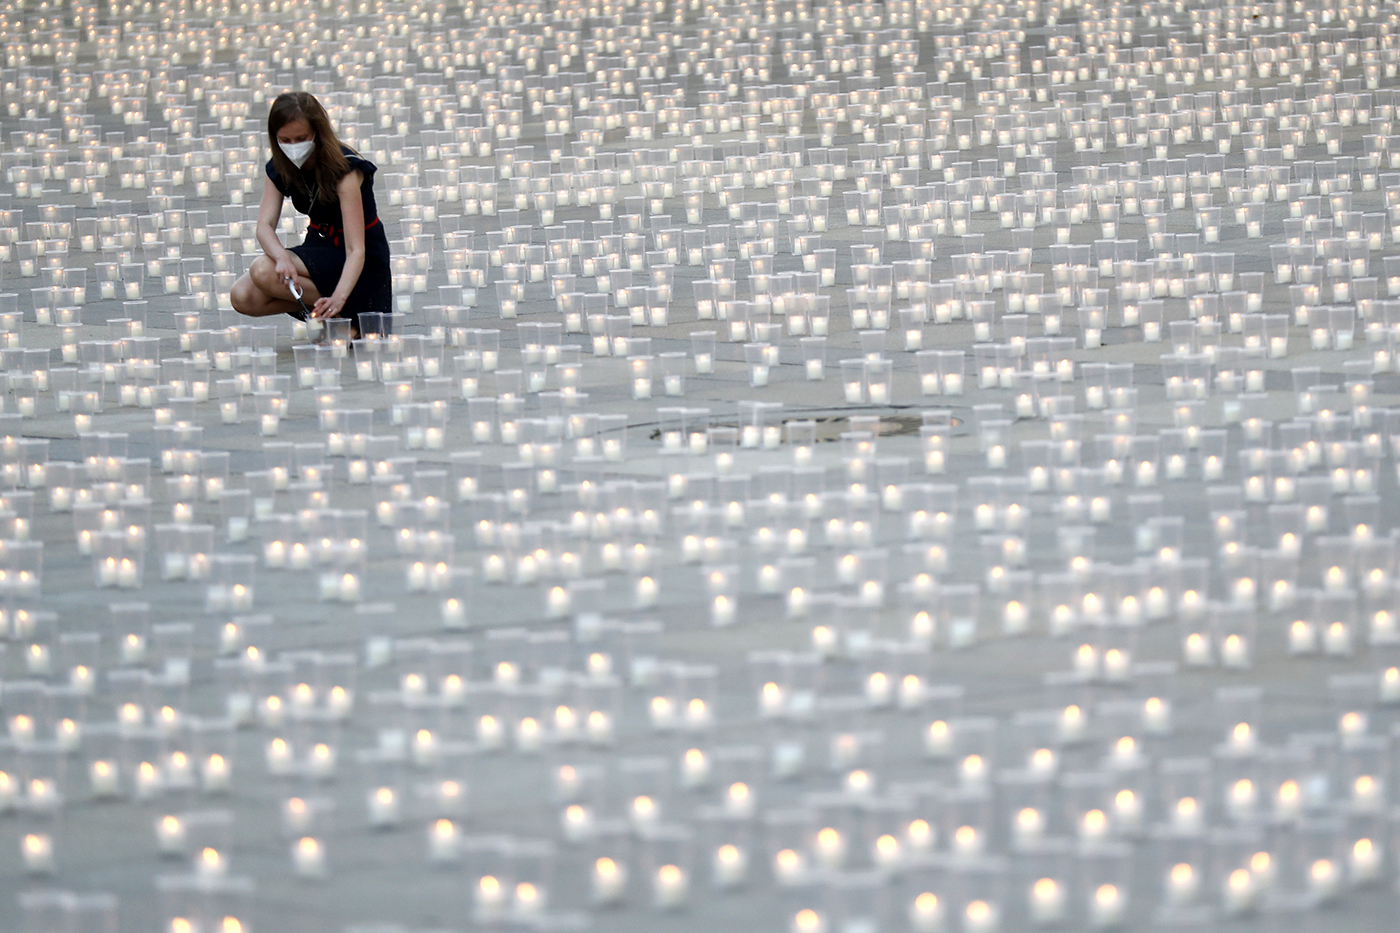 A woman lights a candle to commemorate victims of the COVD-19 pandemic at the Prague Castle in Prague, Czech Republic on May 10, 2021.